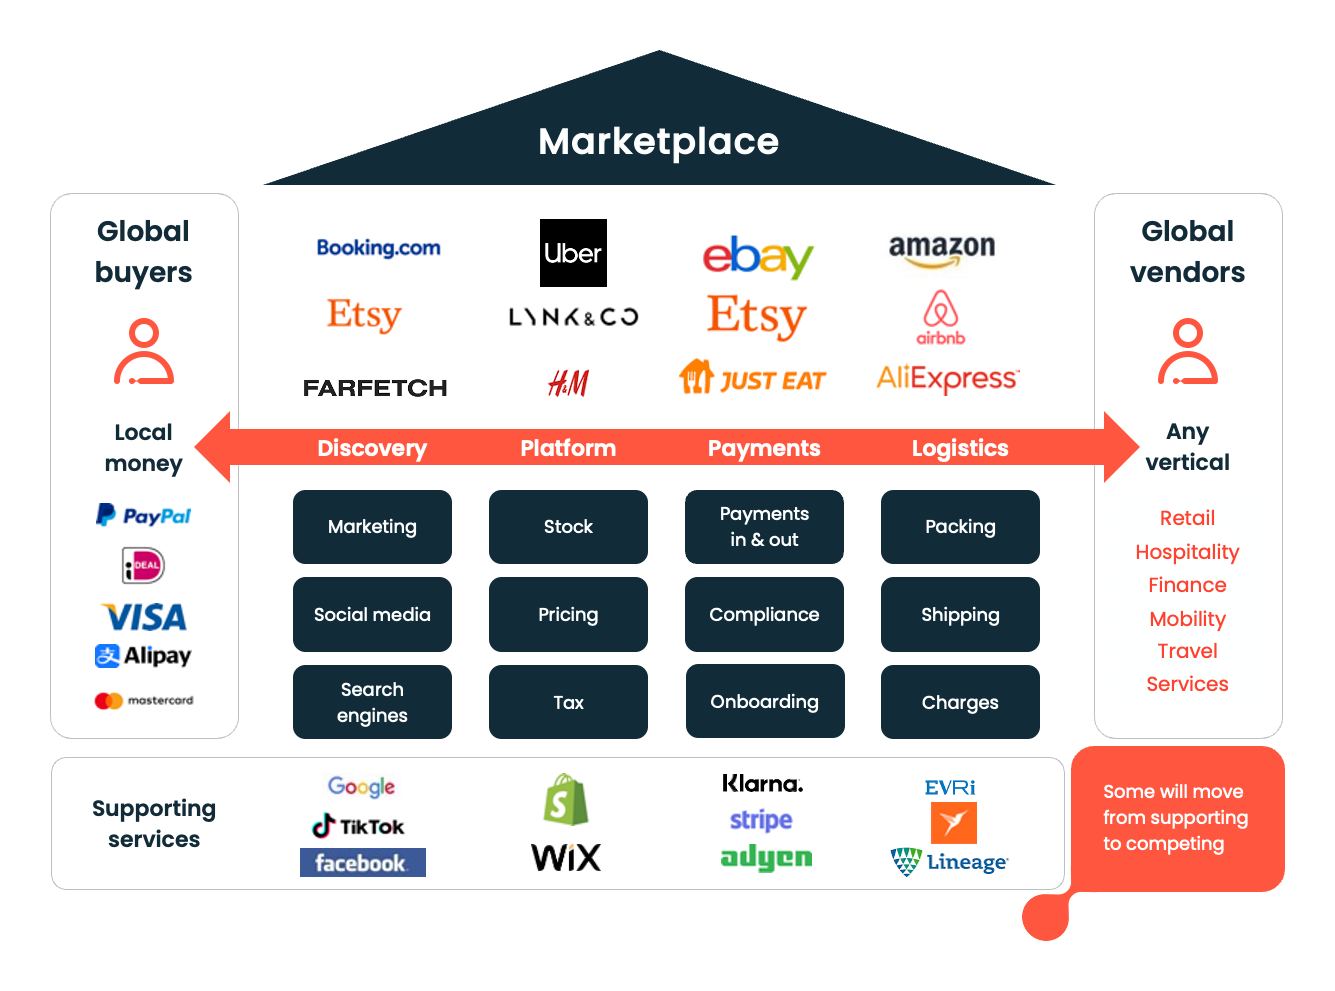 Overview of marketplace examples, functions and services